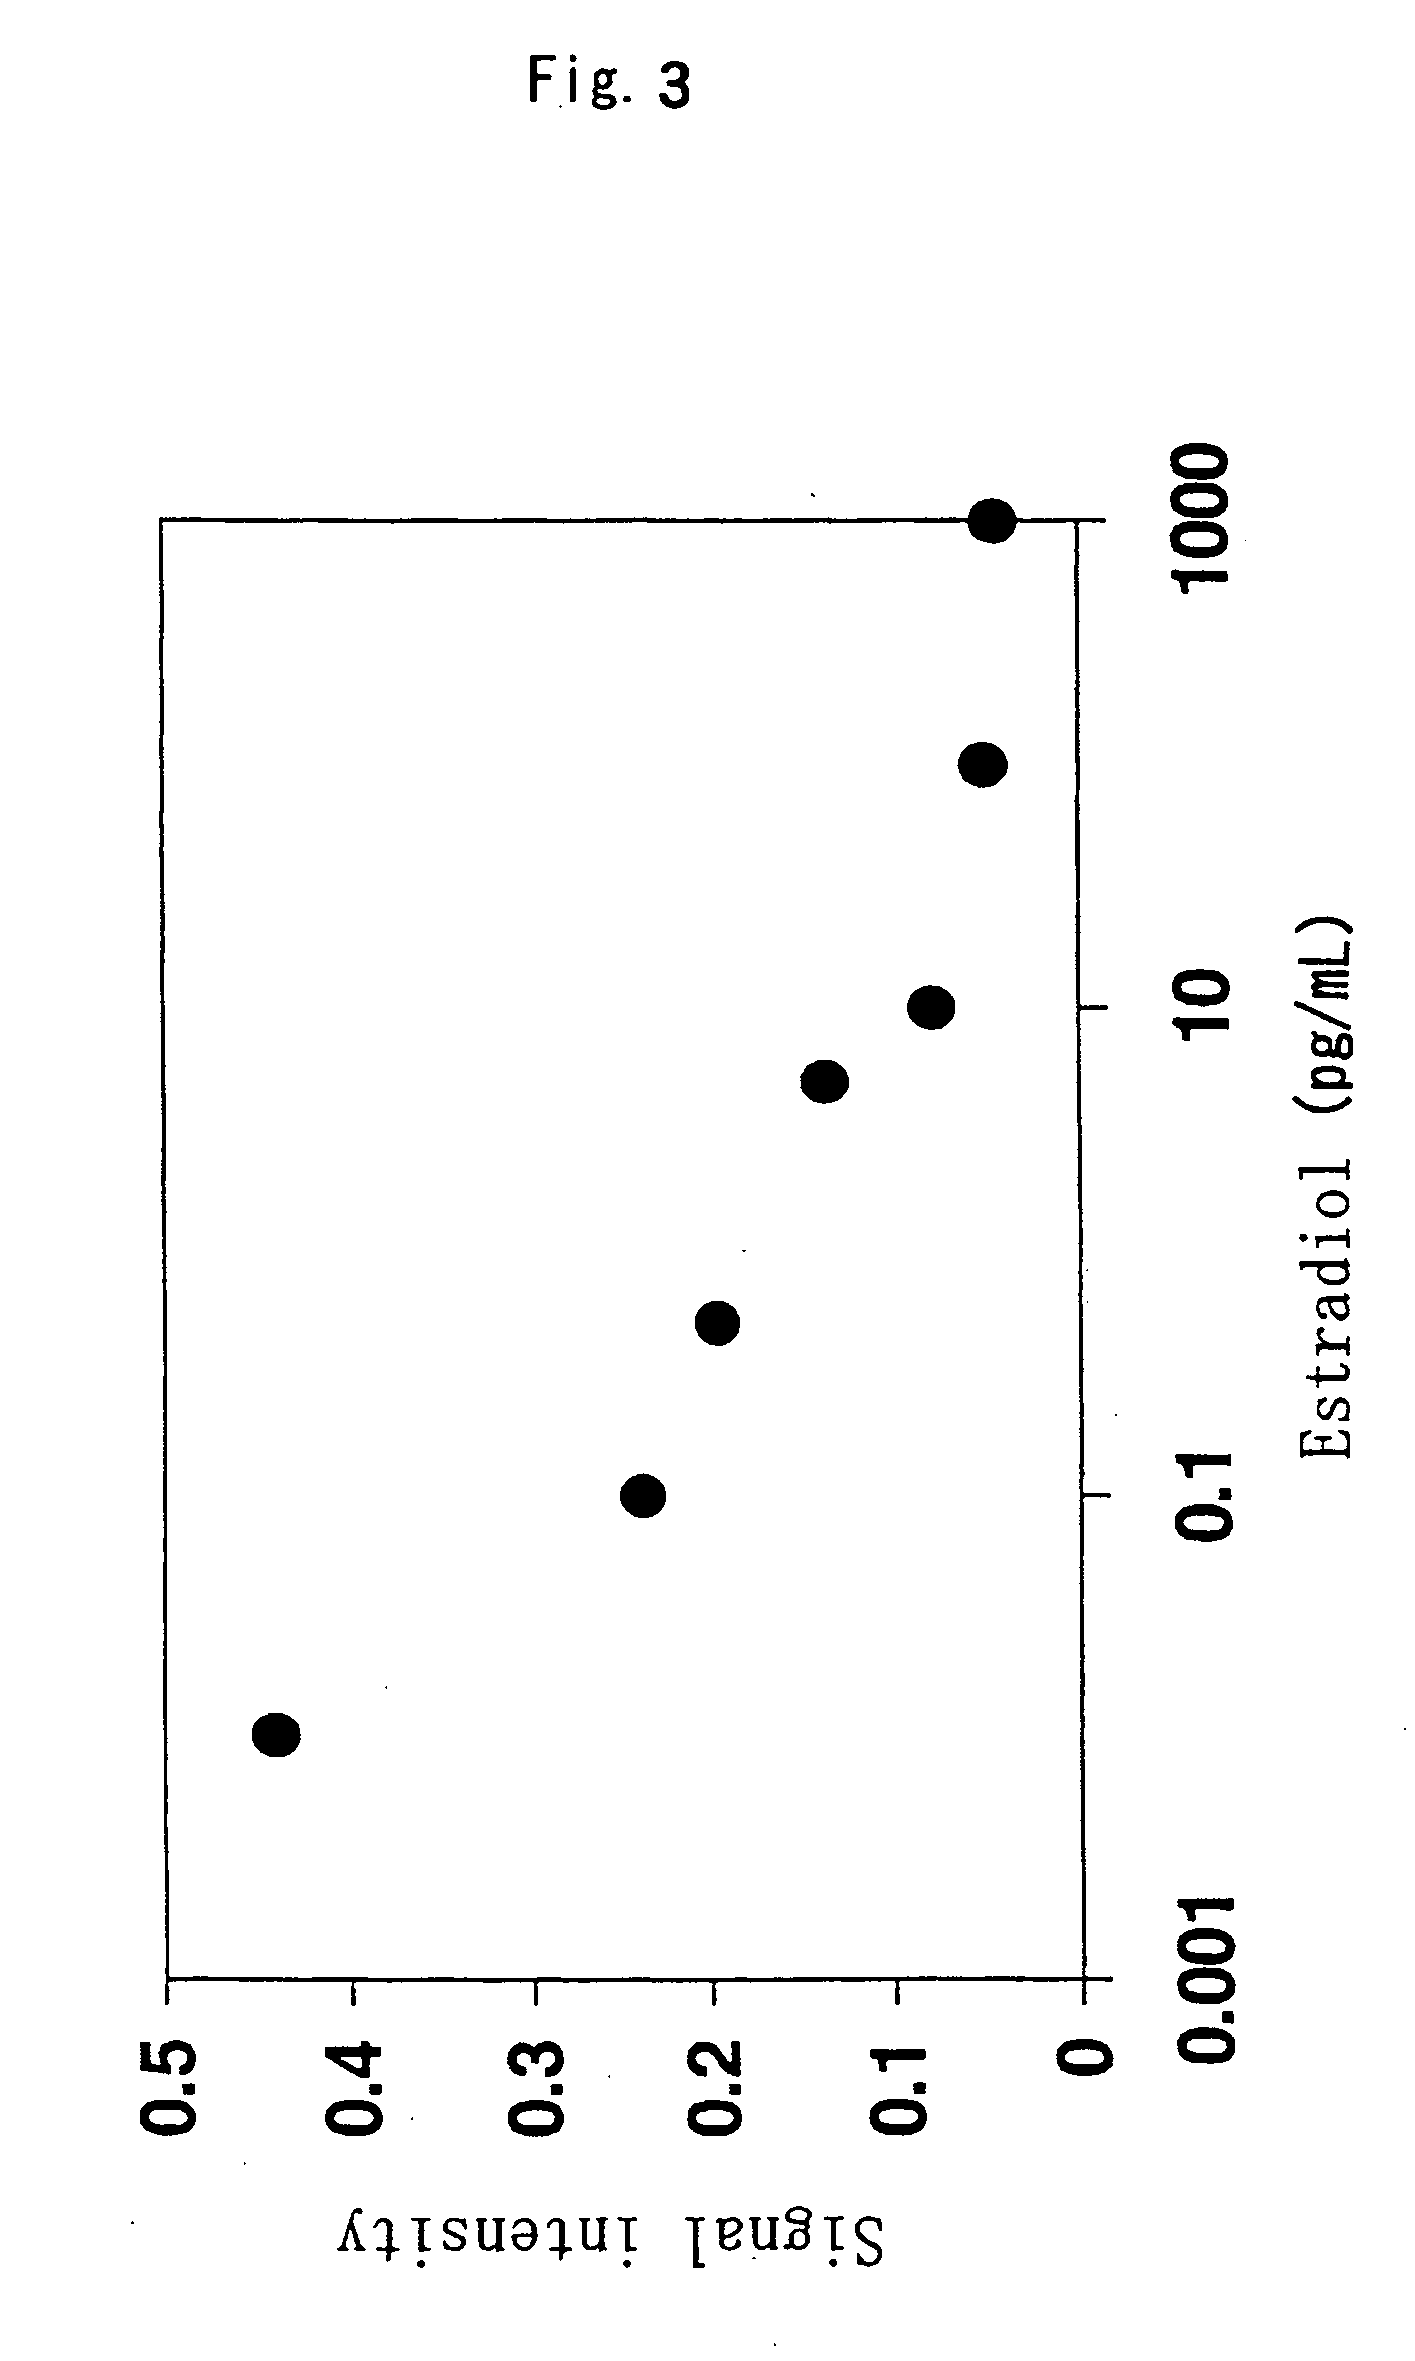 Chip and method for analyzing enzyme immunity